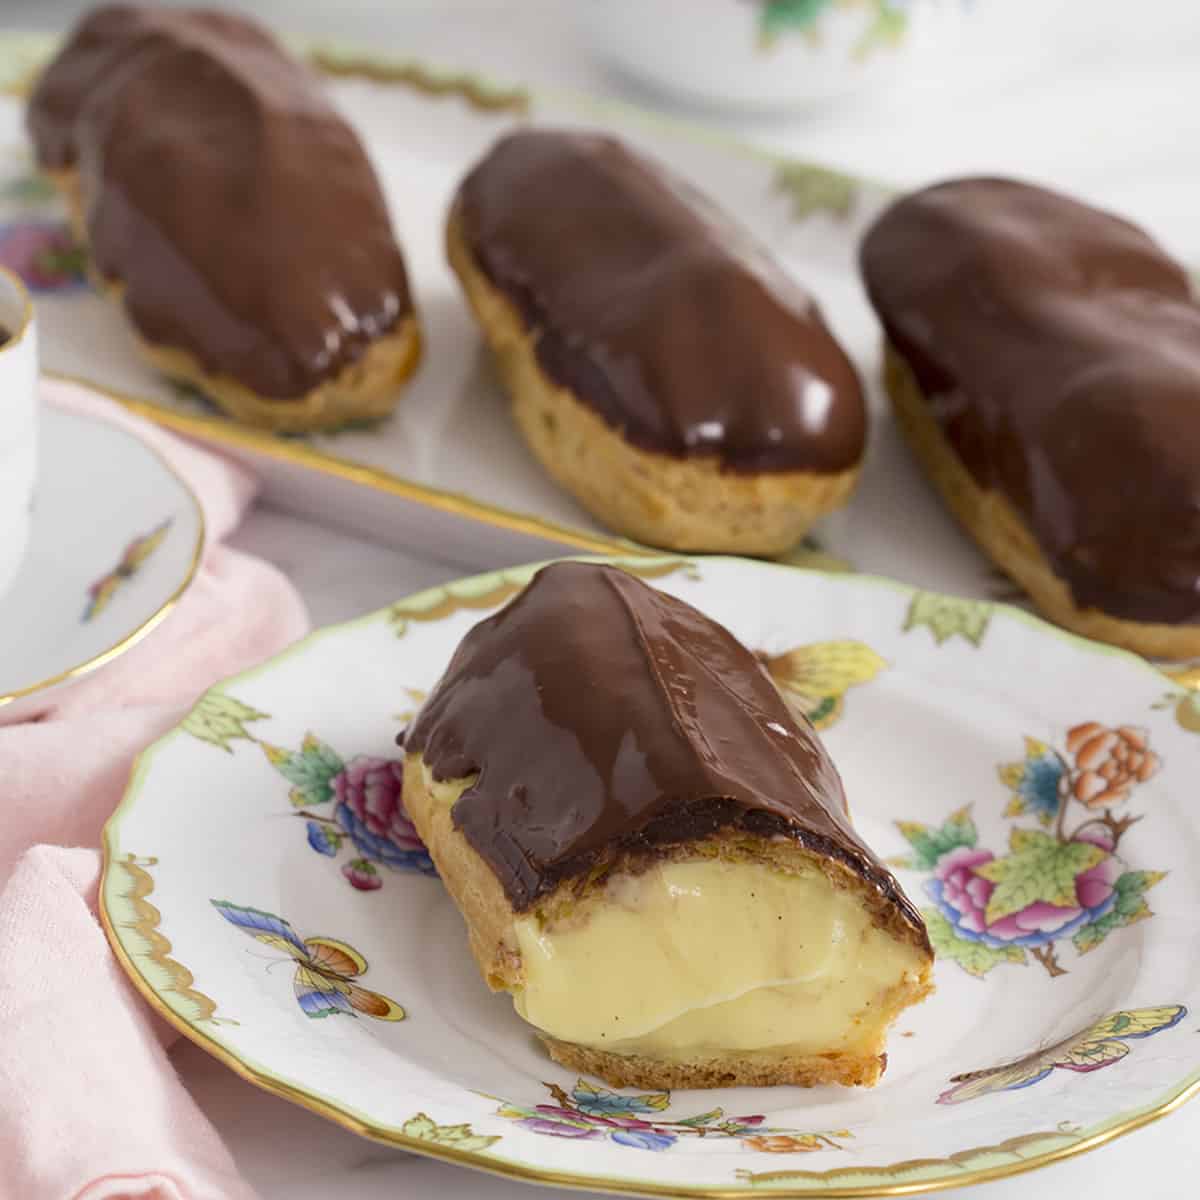 A group of eclairs covered in chocolate and filled with pastry cream